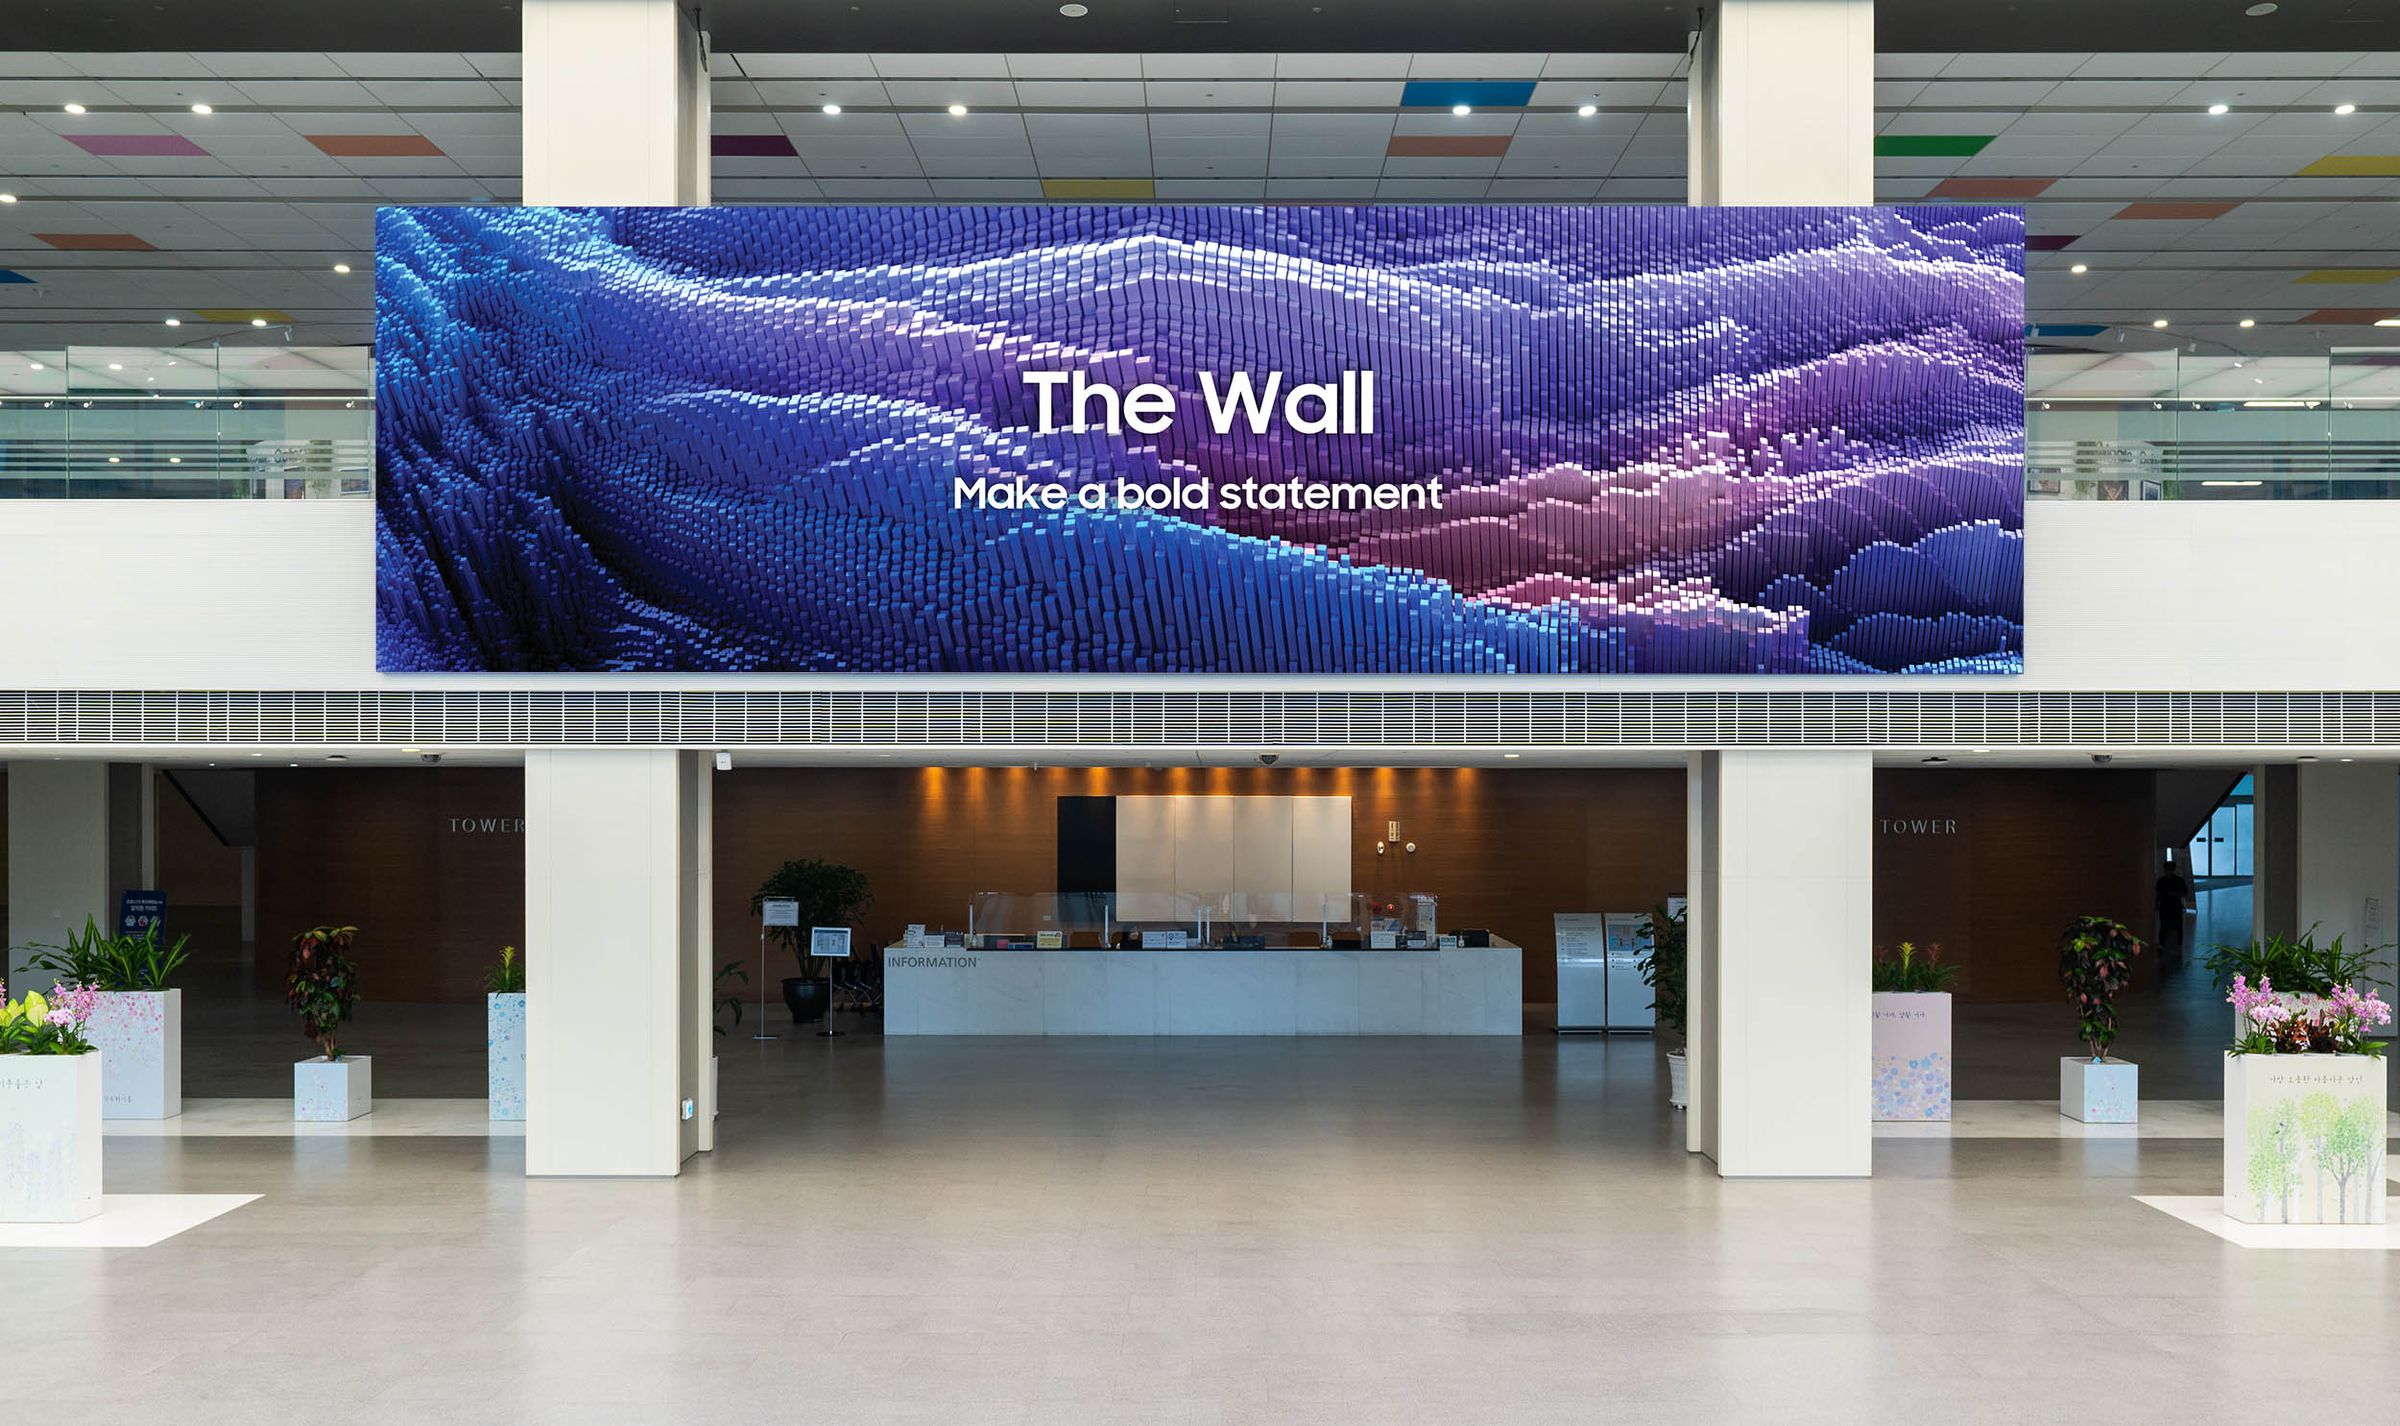 The Wall, now with smaller pixel and a thinner design.